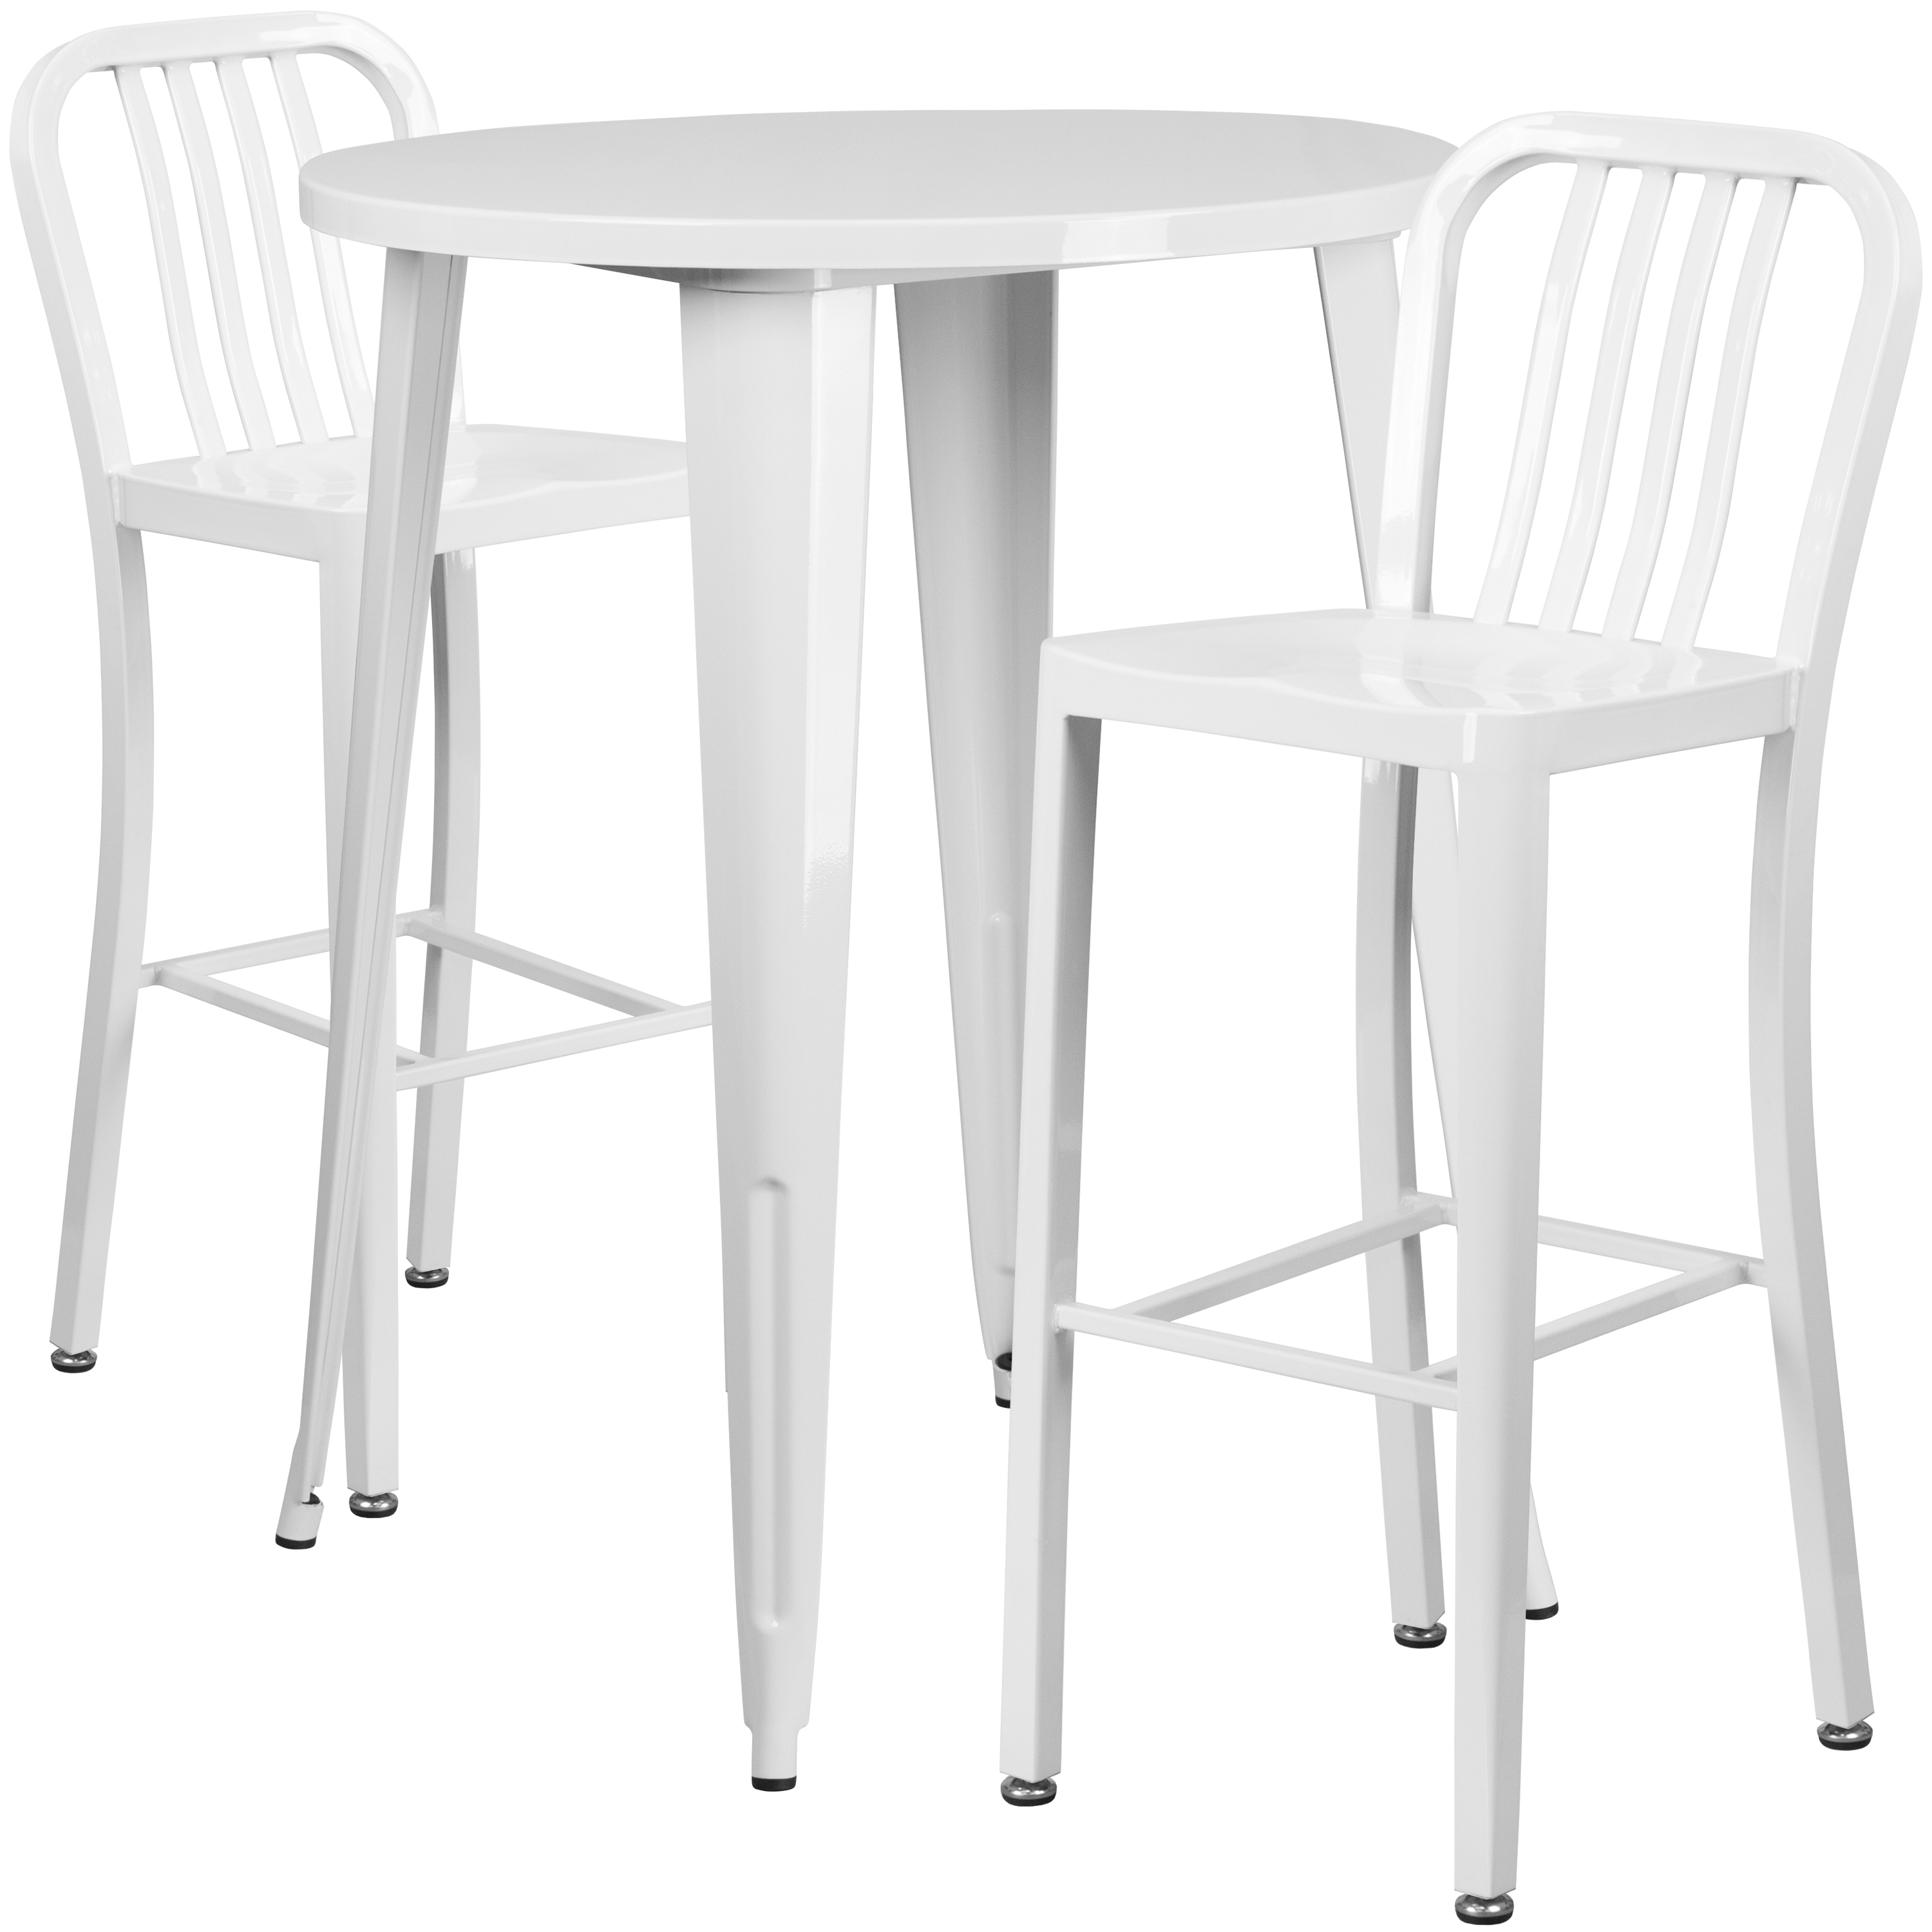 Flash Furniture Brad Commercial Grade 30" Round White Metal Indoor-Outdoor Bar Table Set with 2 Vertical Slat Back Stools - image 1 of 5